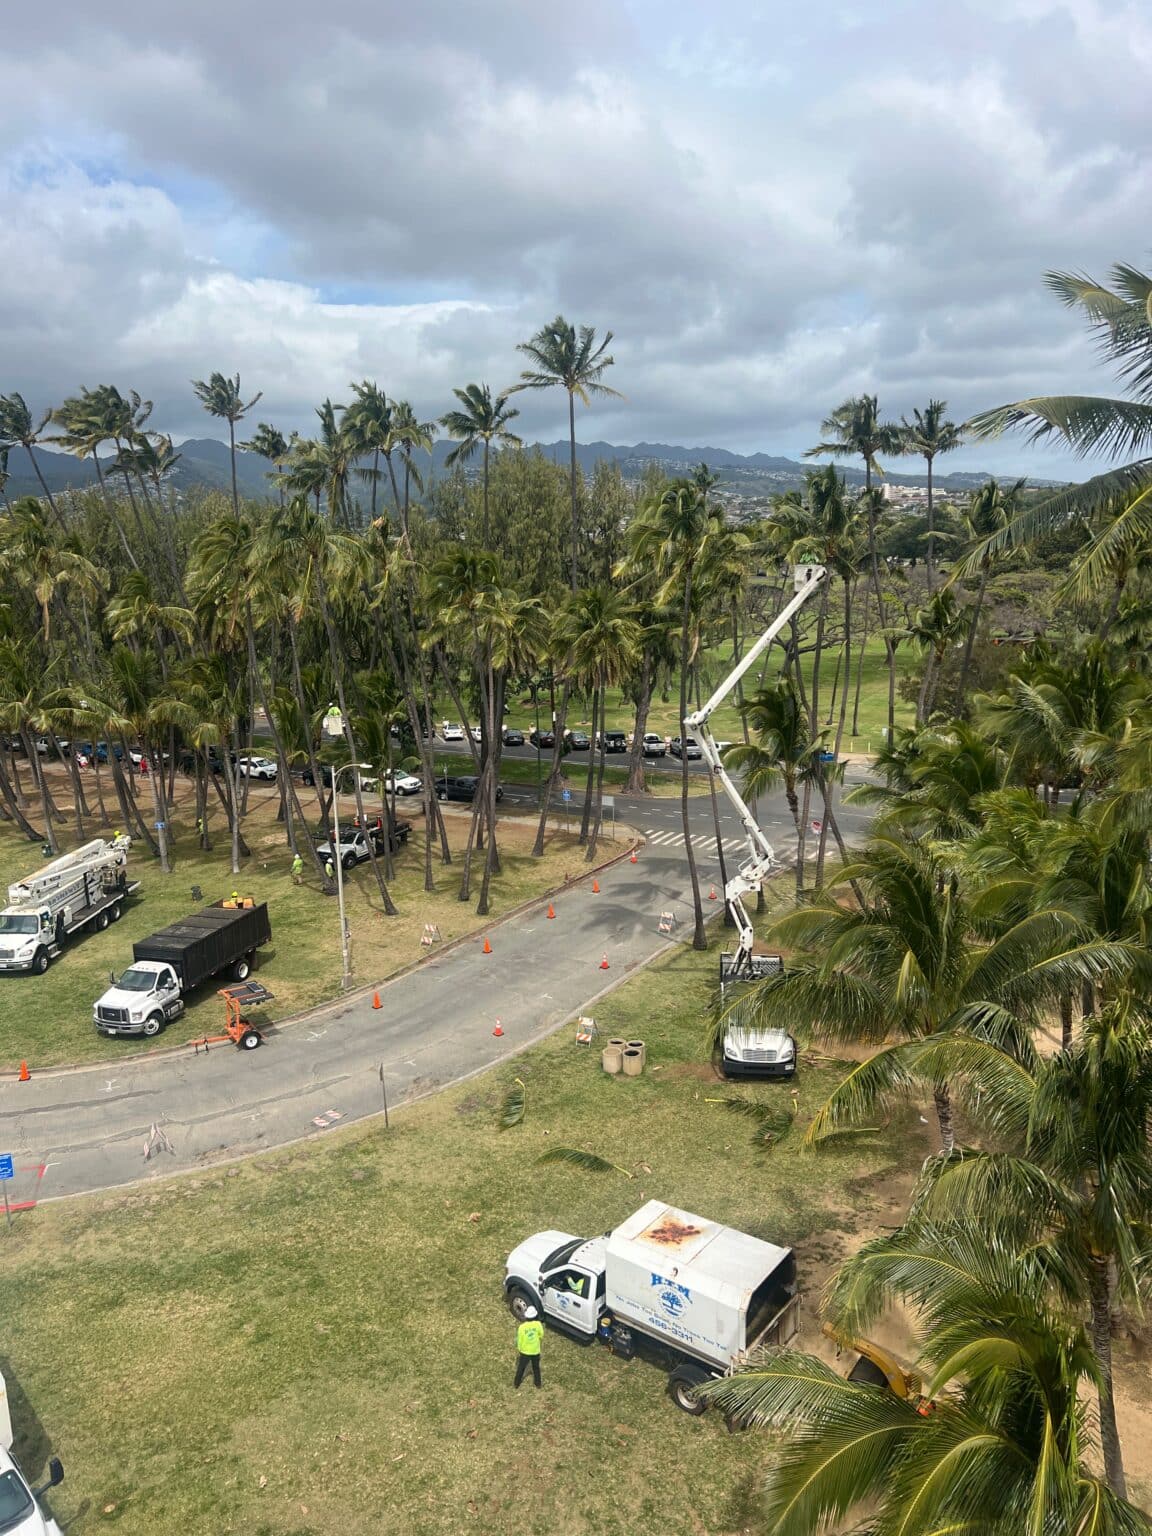 Palm Tree Trimming Services In Hawaii - HTM Contractors